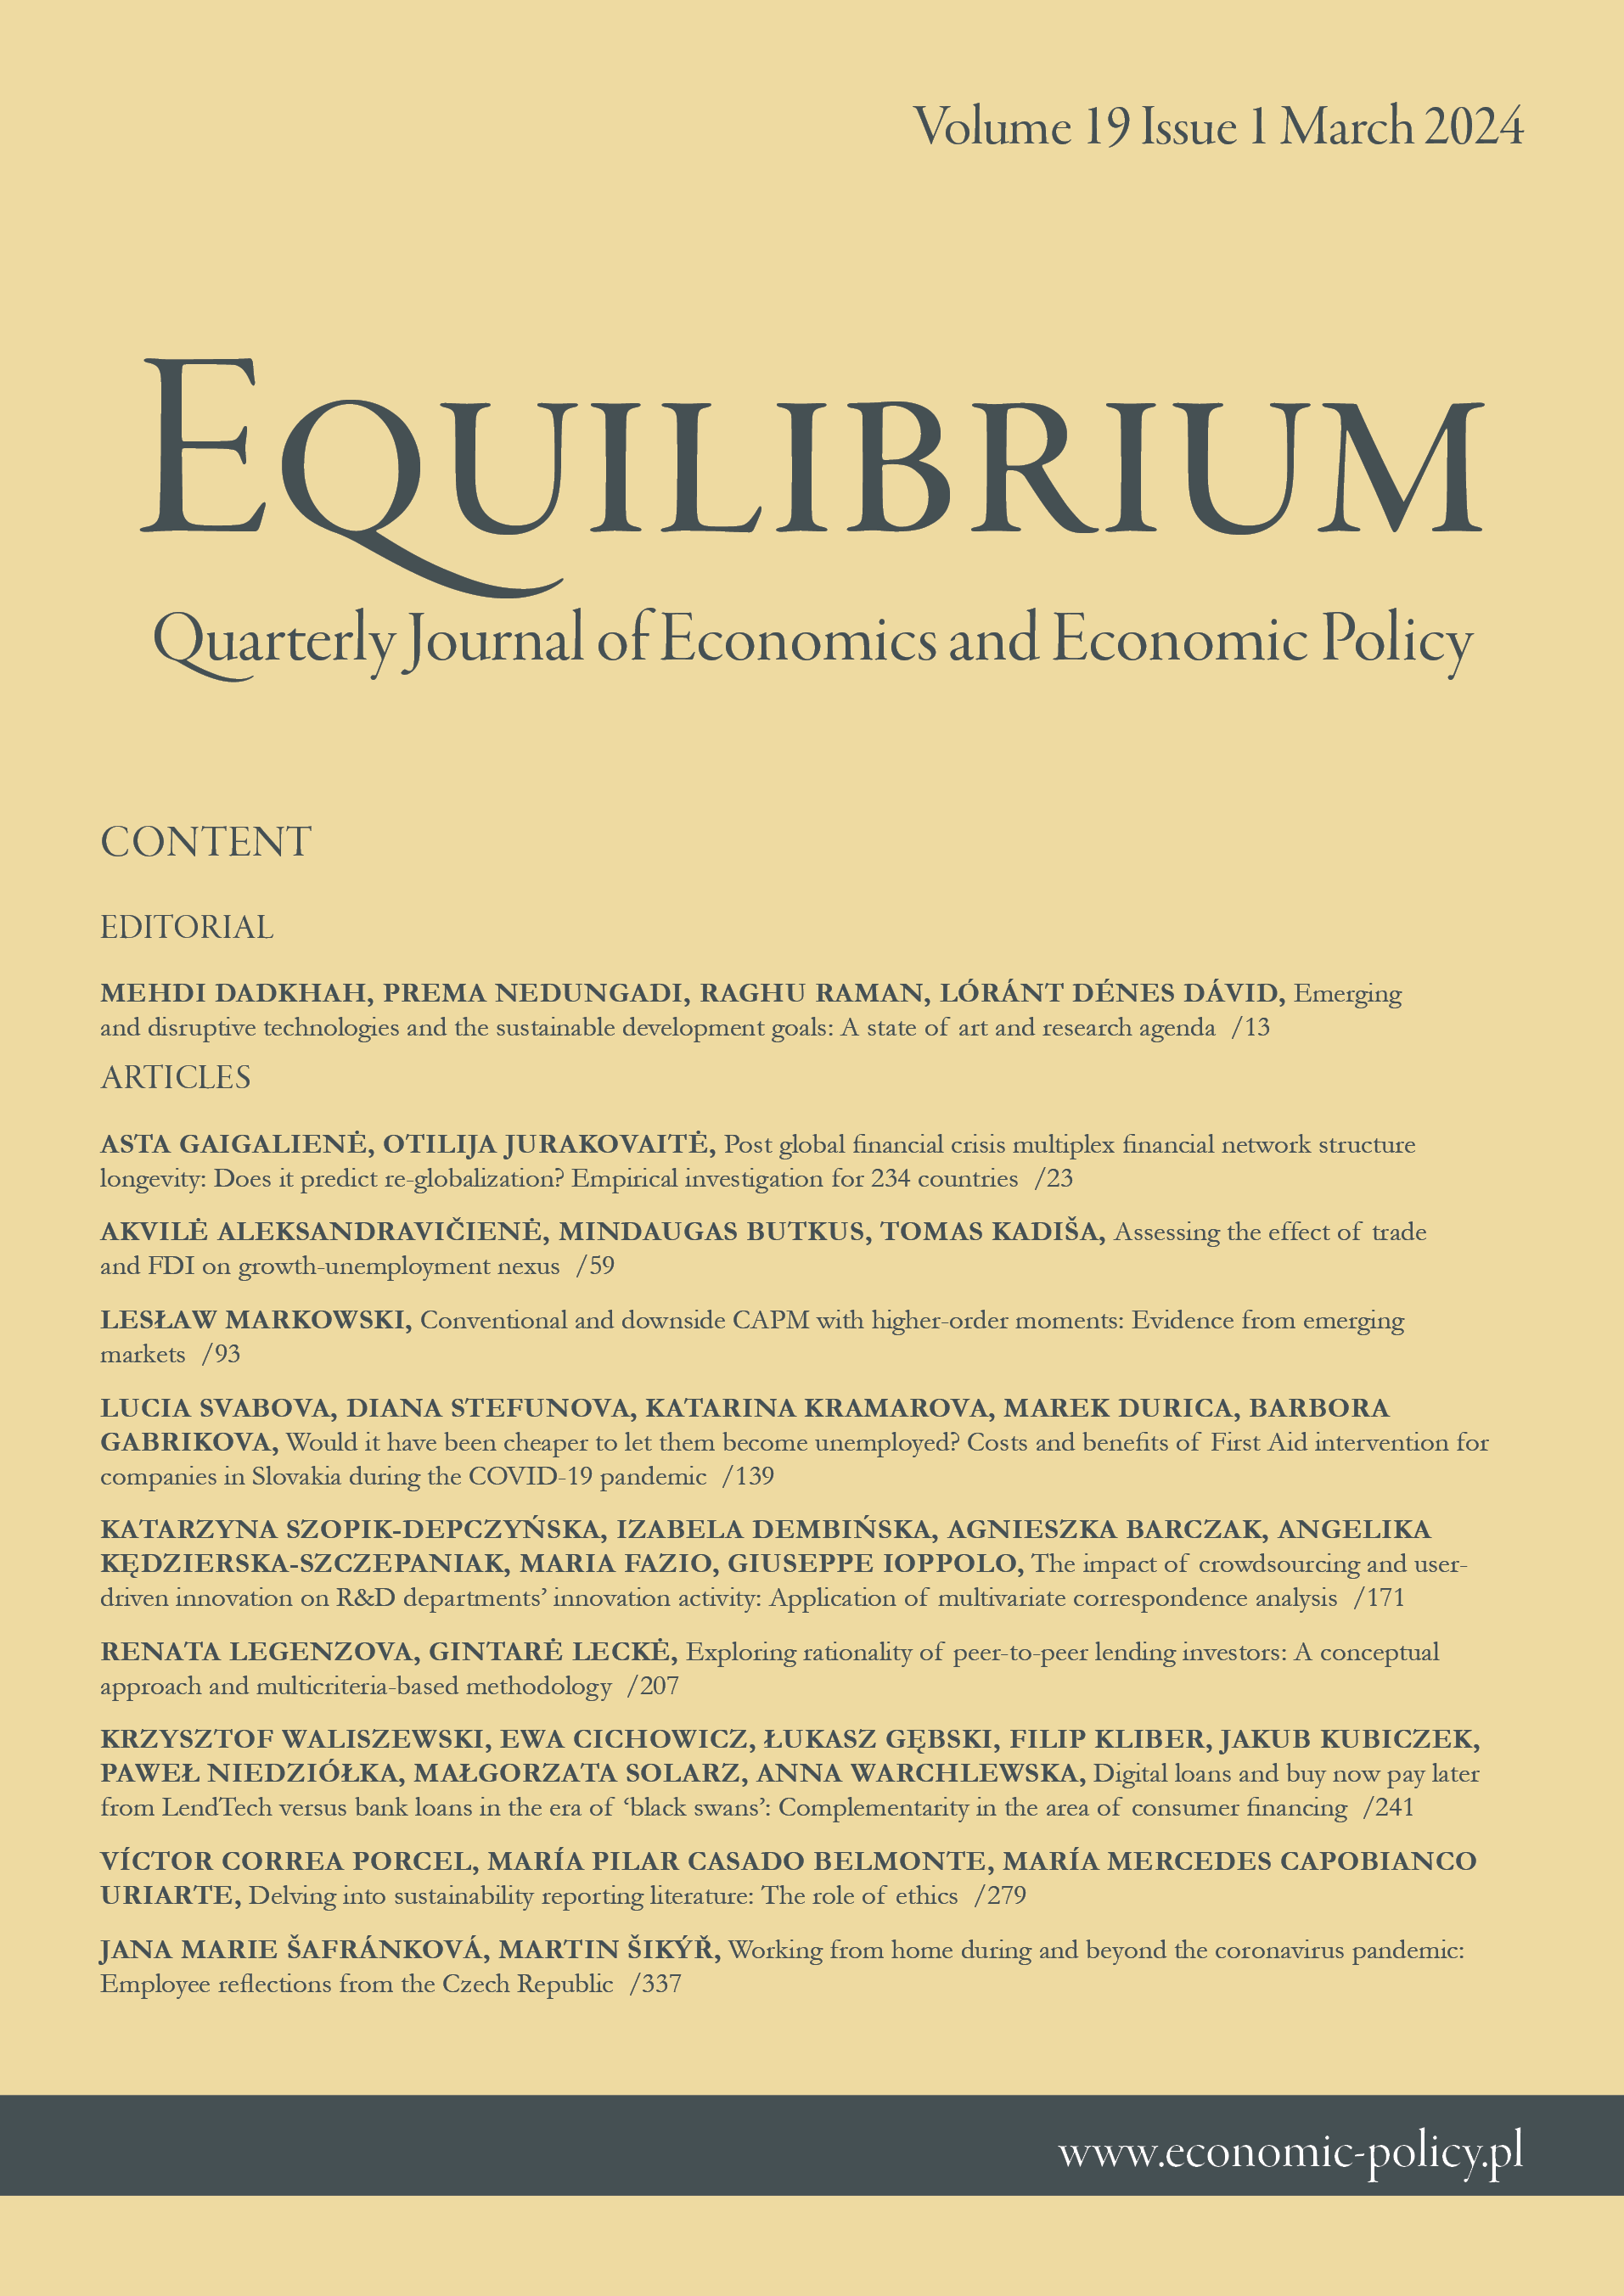 Conventional and downside CAPM with higher-order moments: Evidence from emerging markets Cover Image